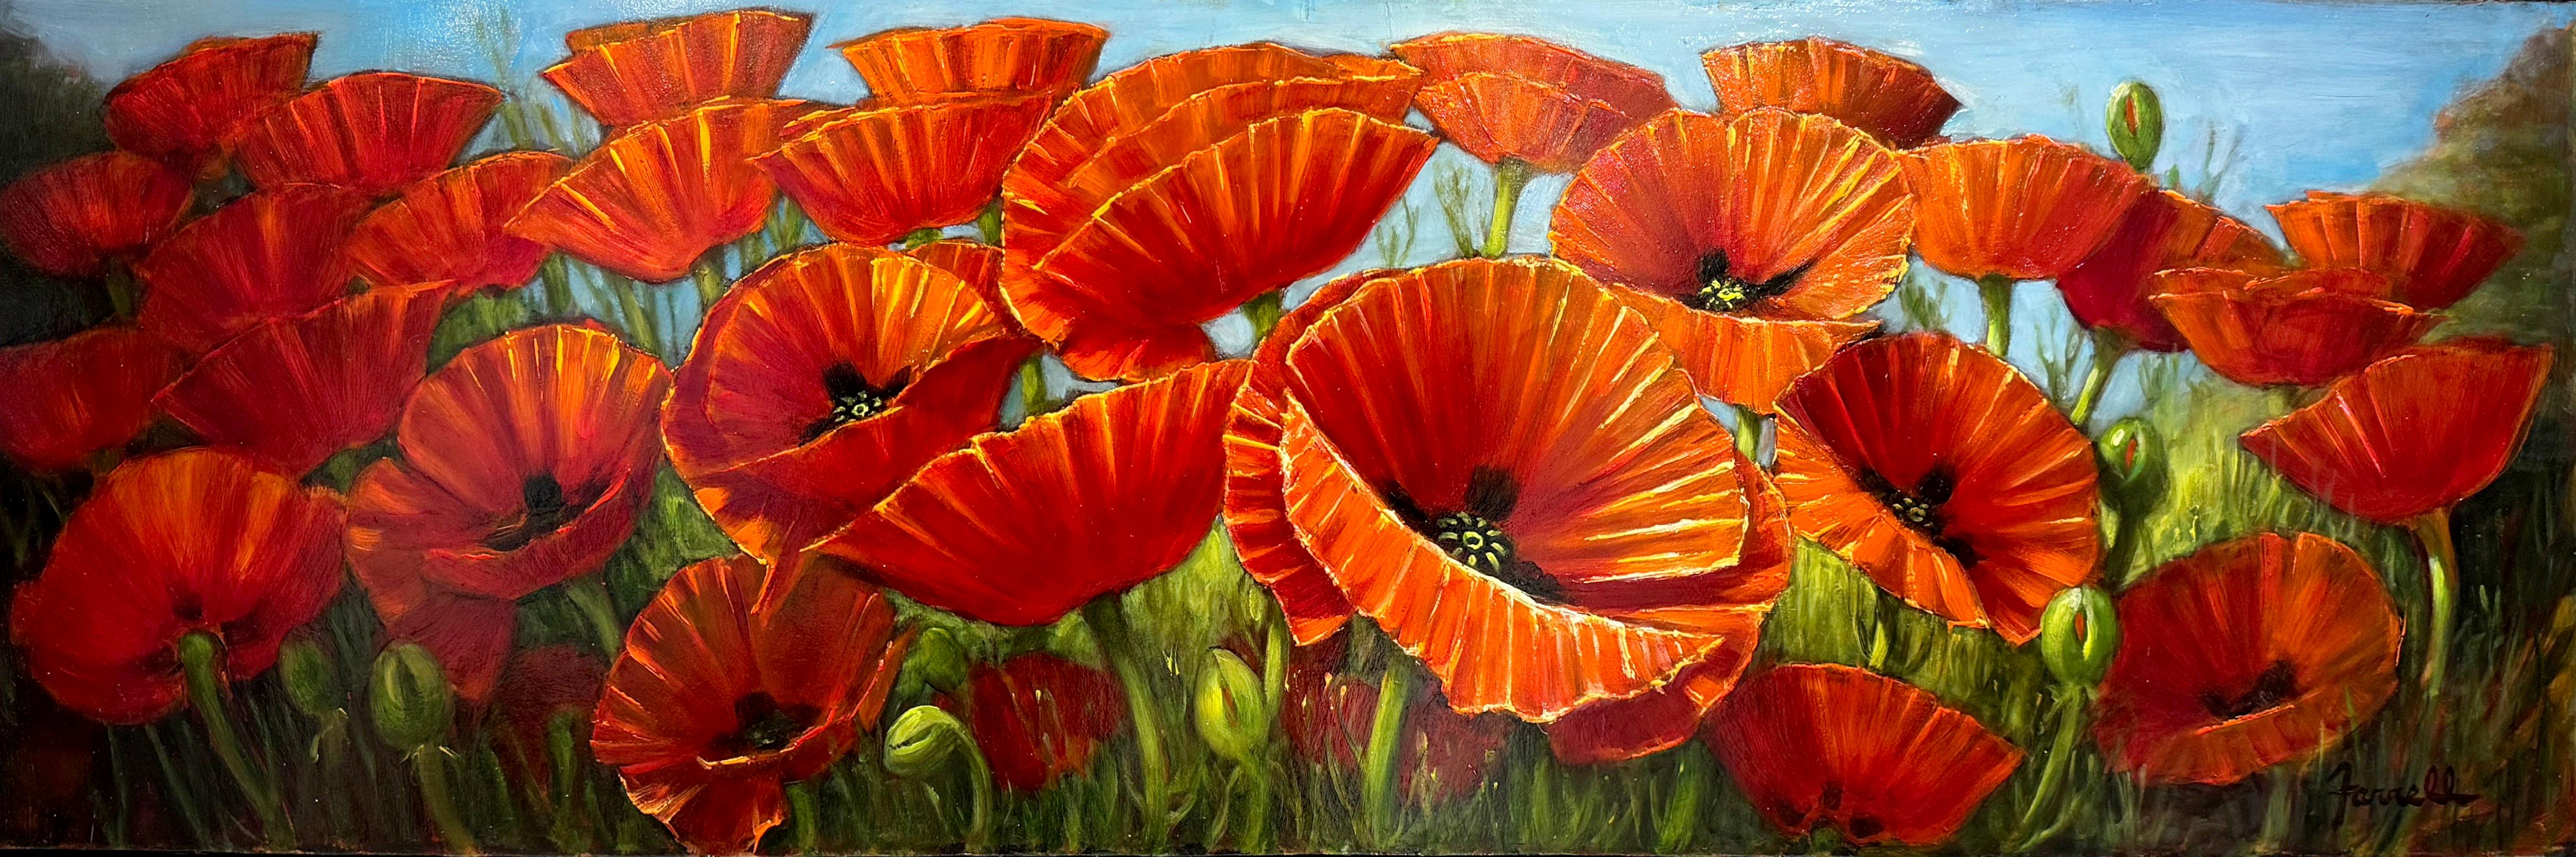 Sean Farrell, "Red Poppies in Tuscany", 12x36 Floral Still Life Oil Painting